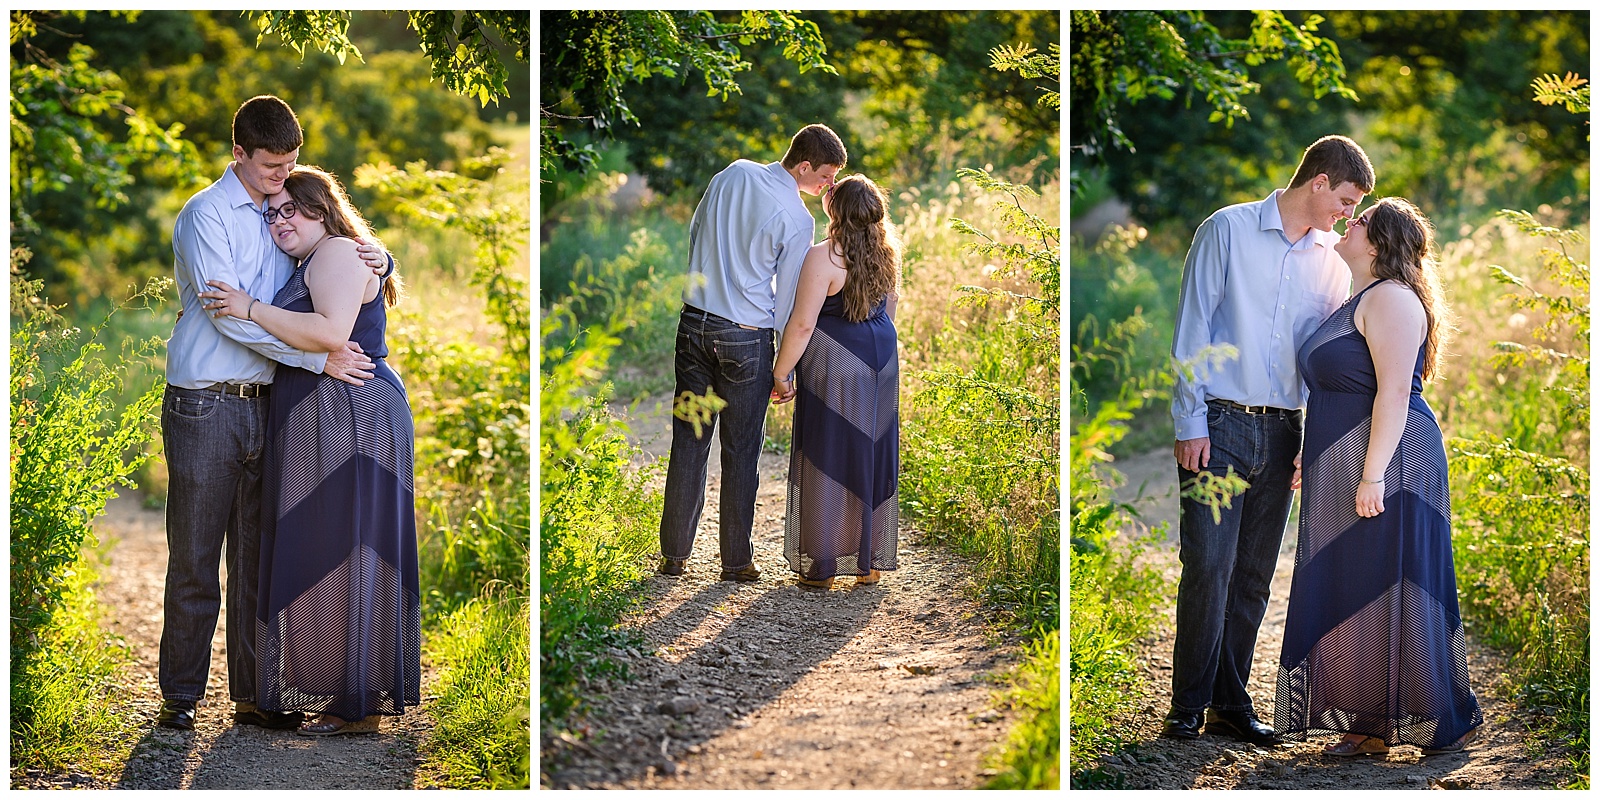 An engagement session at Cedar Crest (the governor's mansion) in Topeka, Kansas.